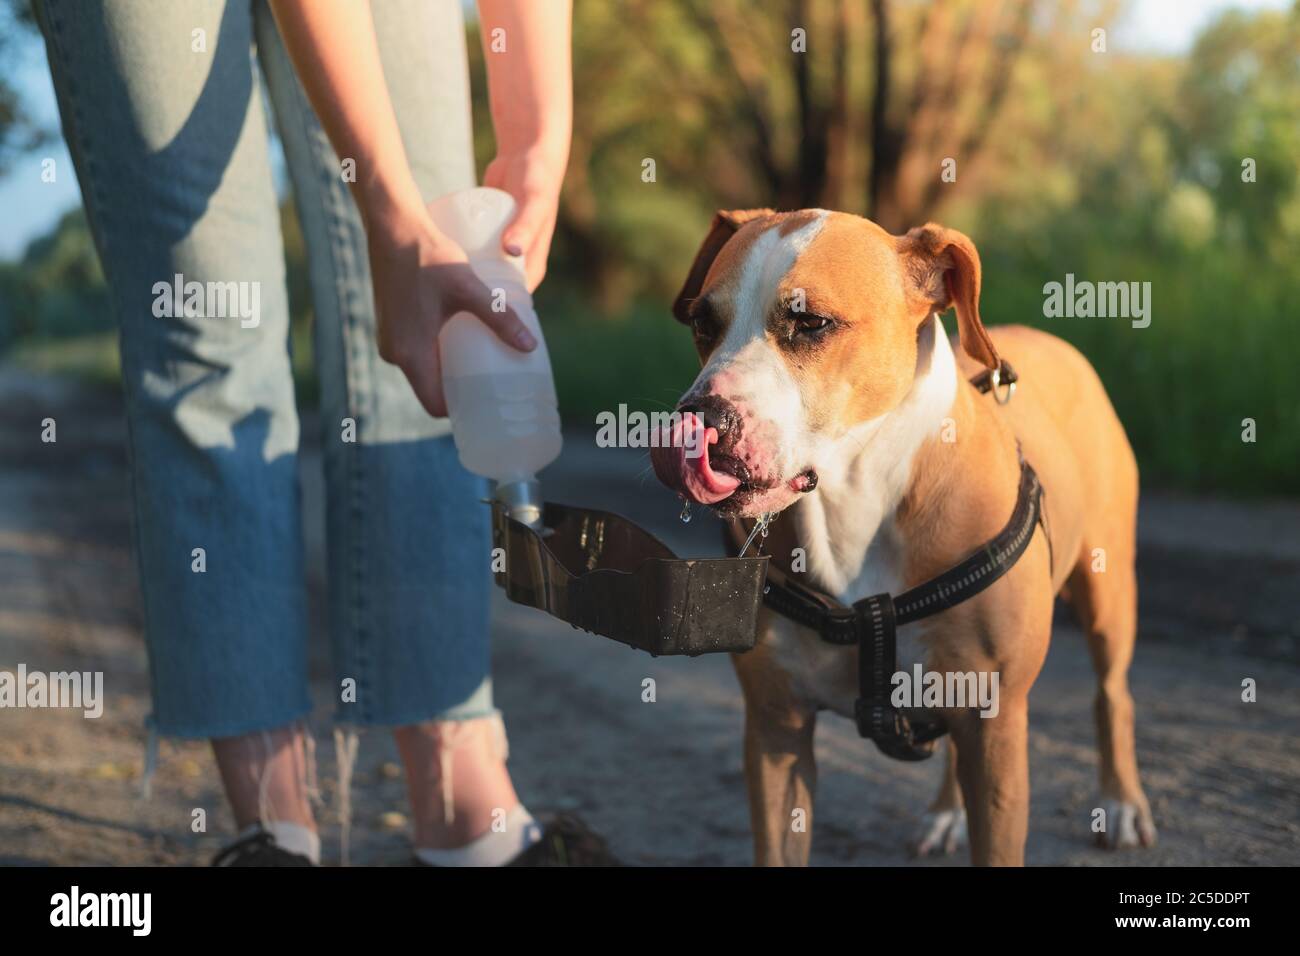 Keeping a dog hydrated in summer. Using dog water bottle at walk or hiking trip, taking care of pets concept Stock Photo